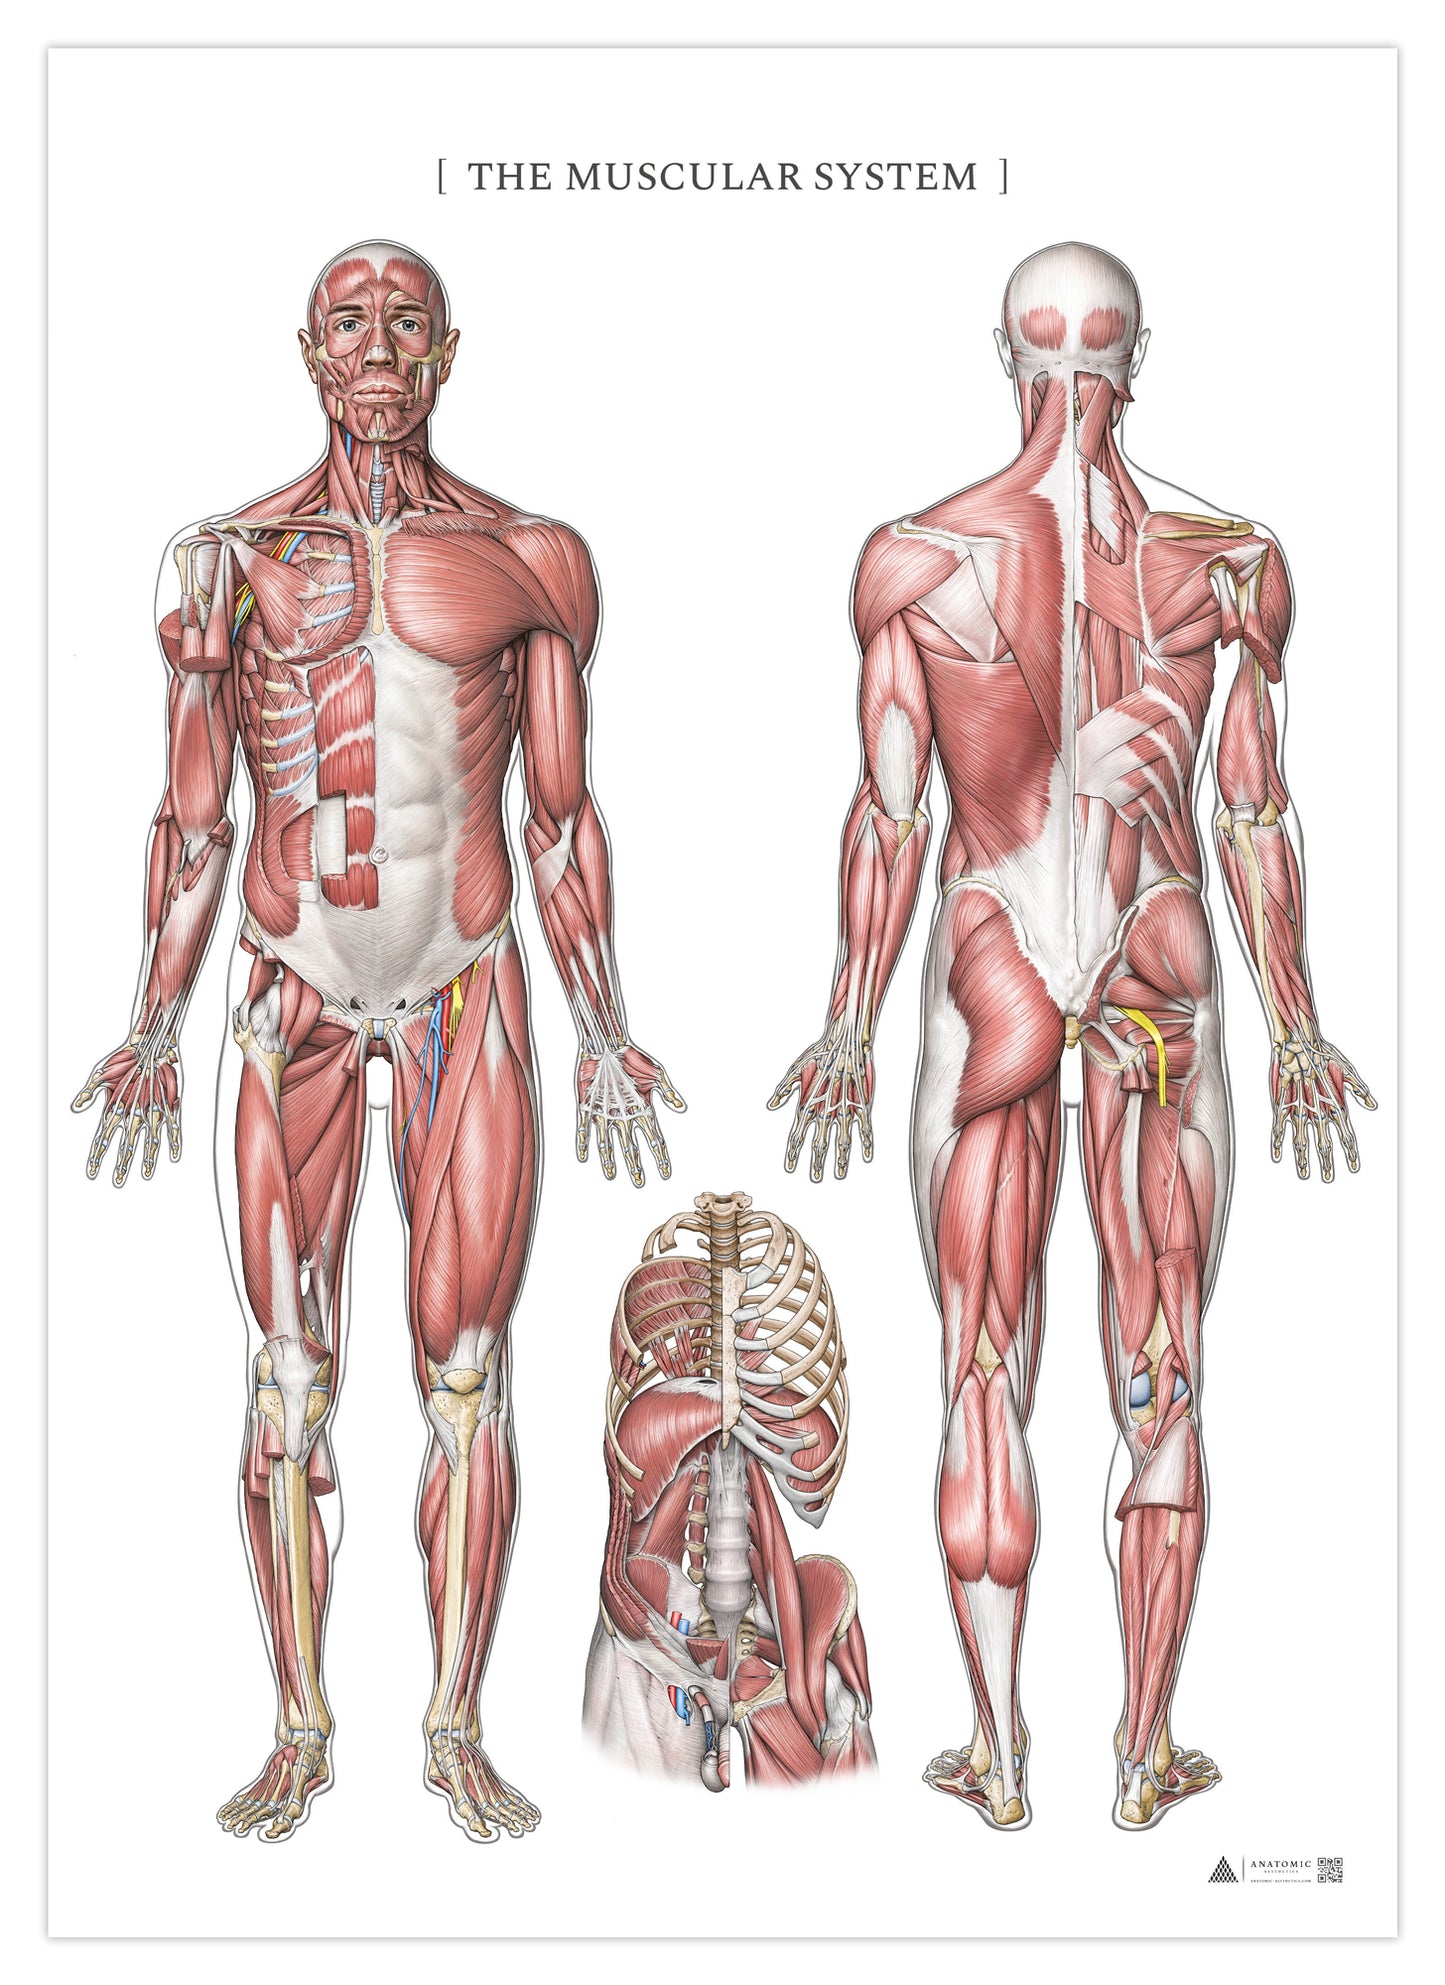 Anatomy poster - The muscular system